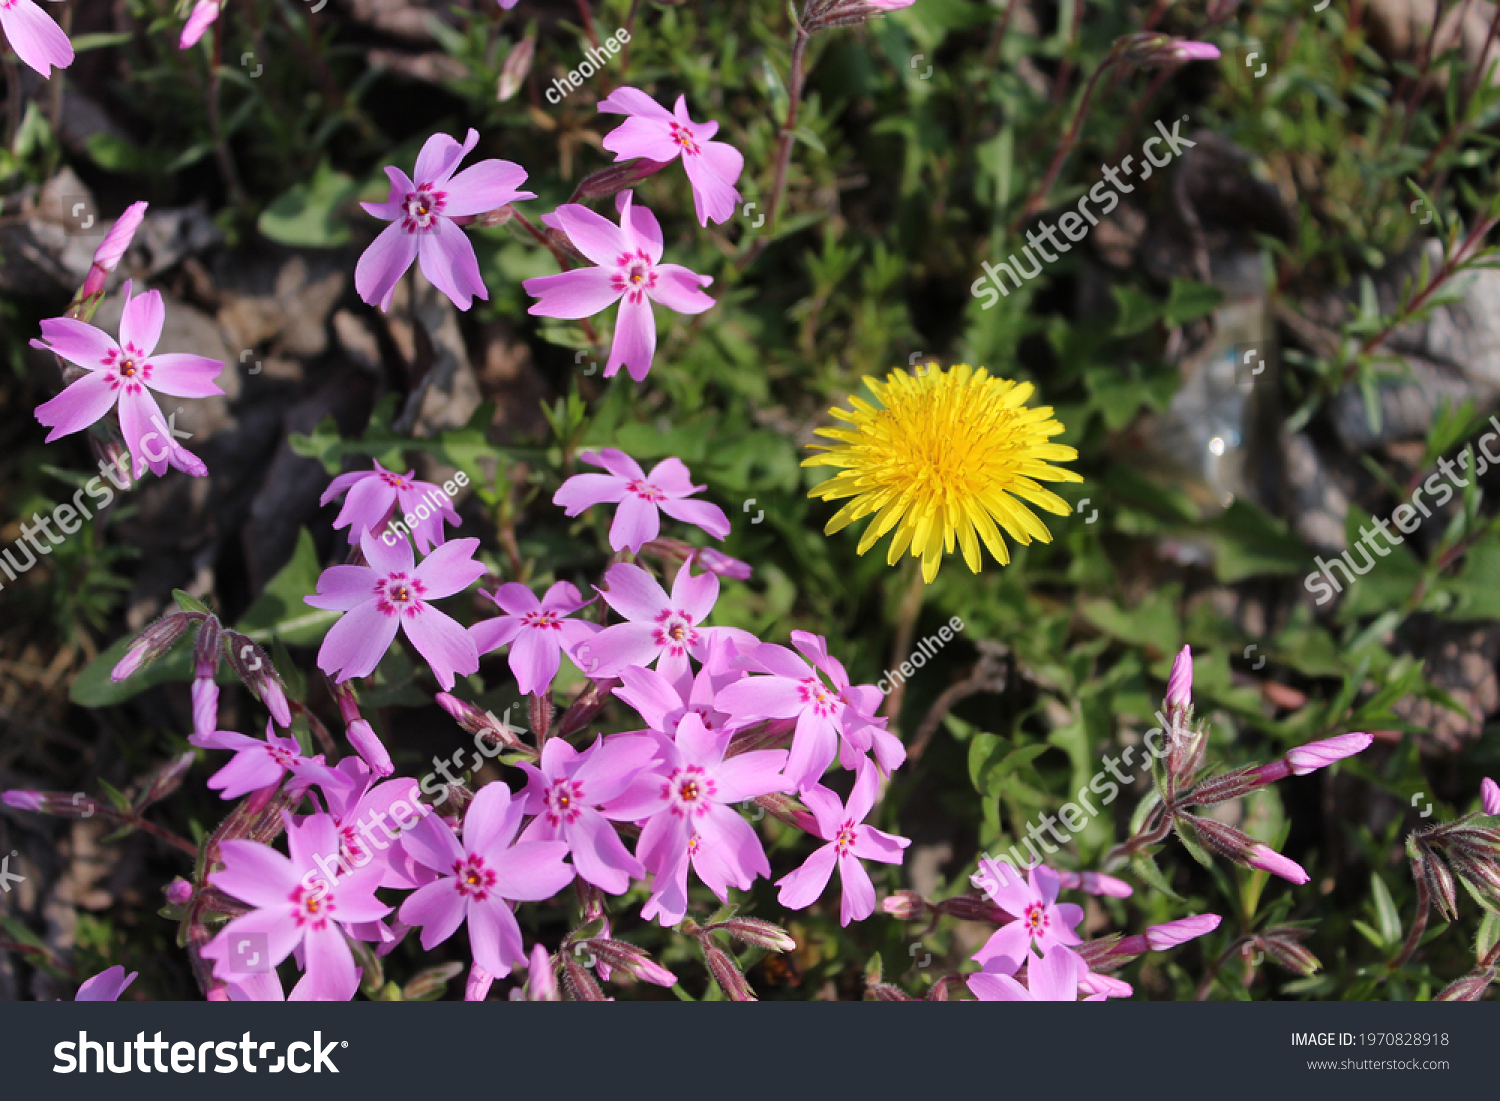 yellow dandelion and pink flower grass #1970828918